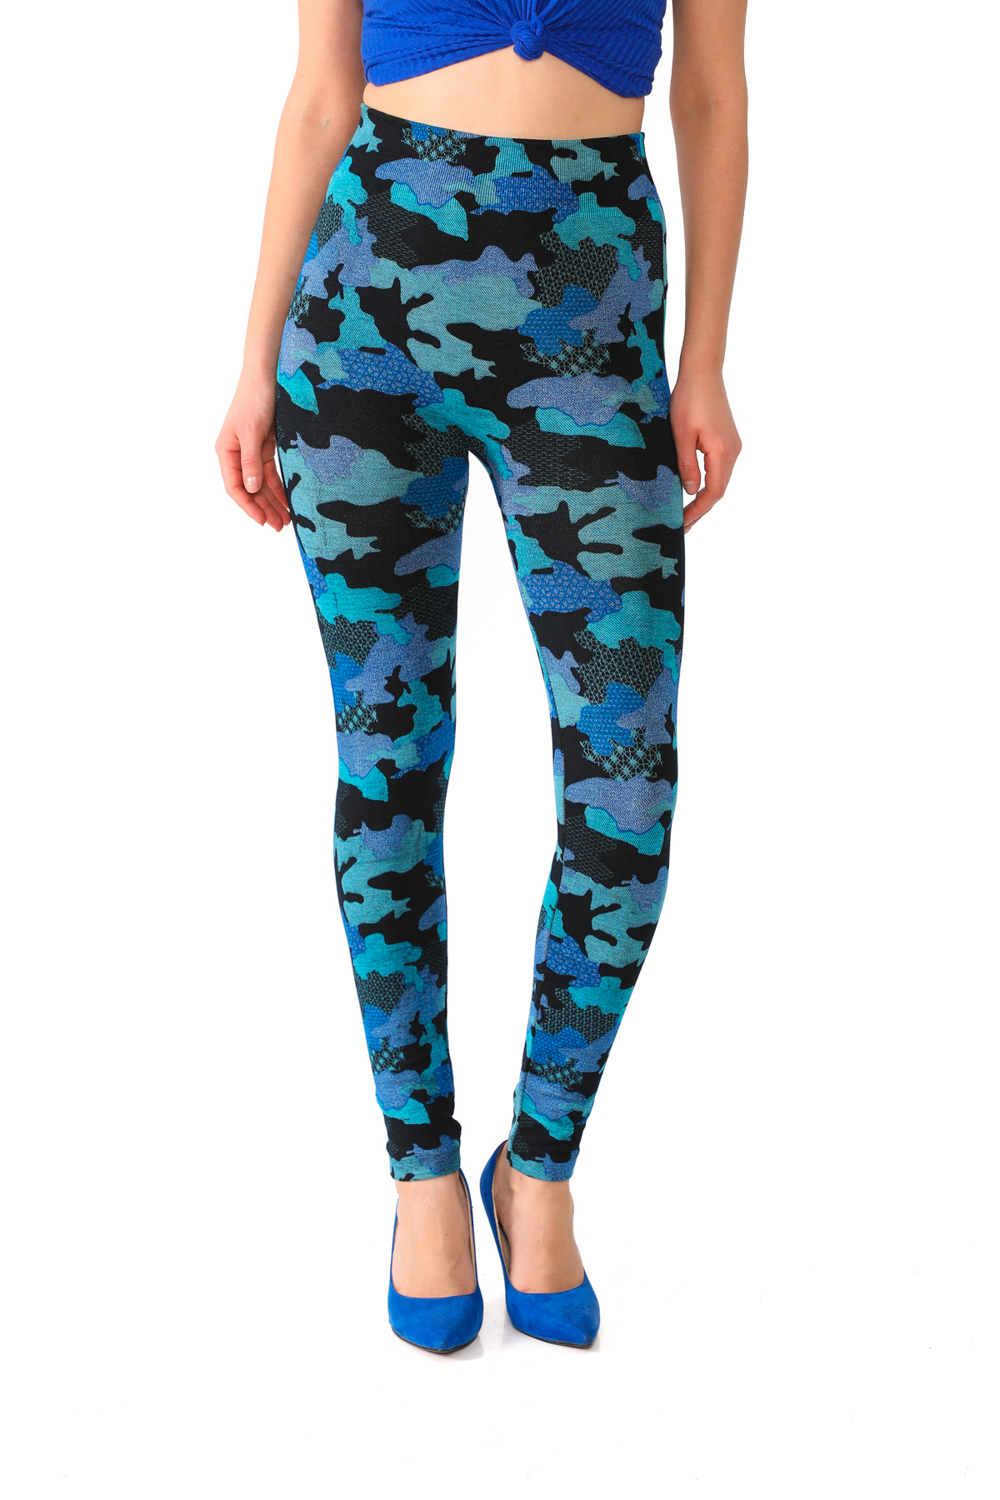 Denim Leggings with Blue Camouflage Pattern - Its All Leggings